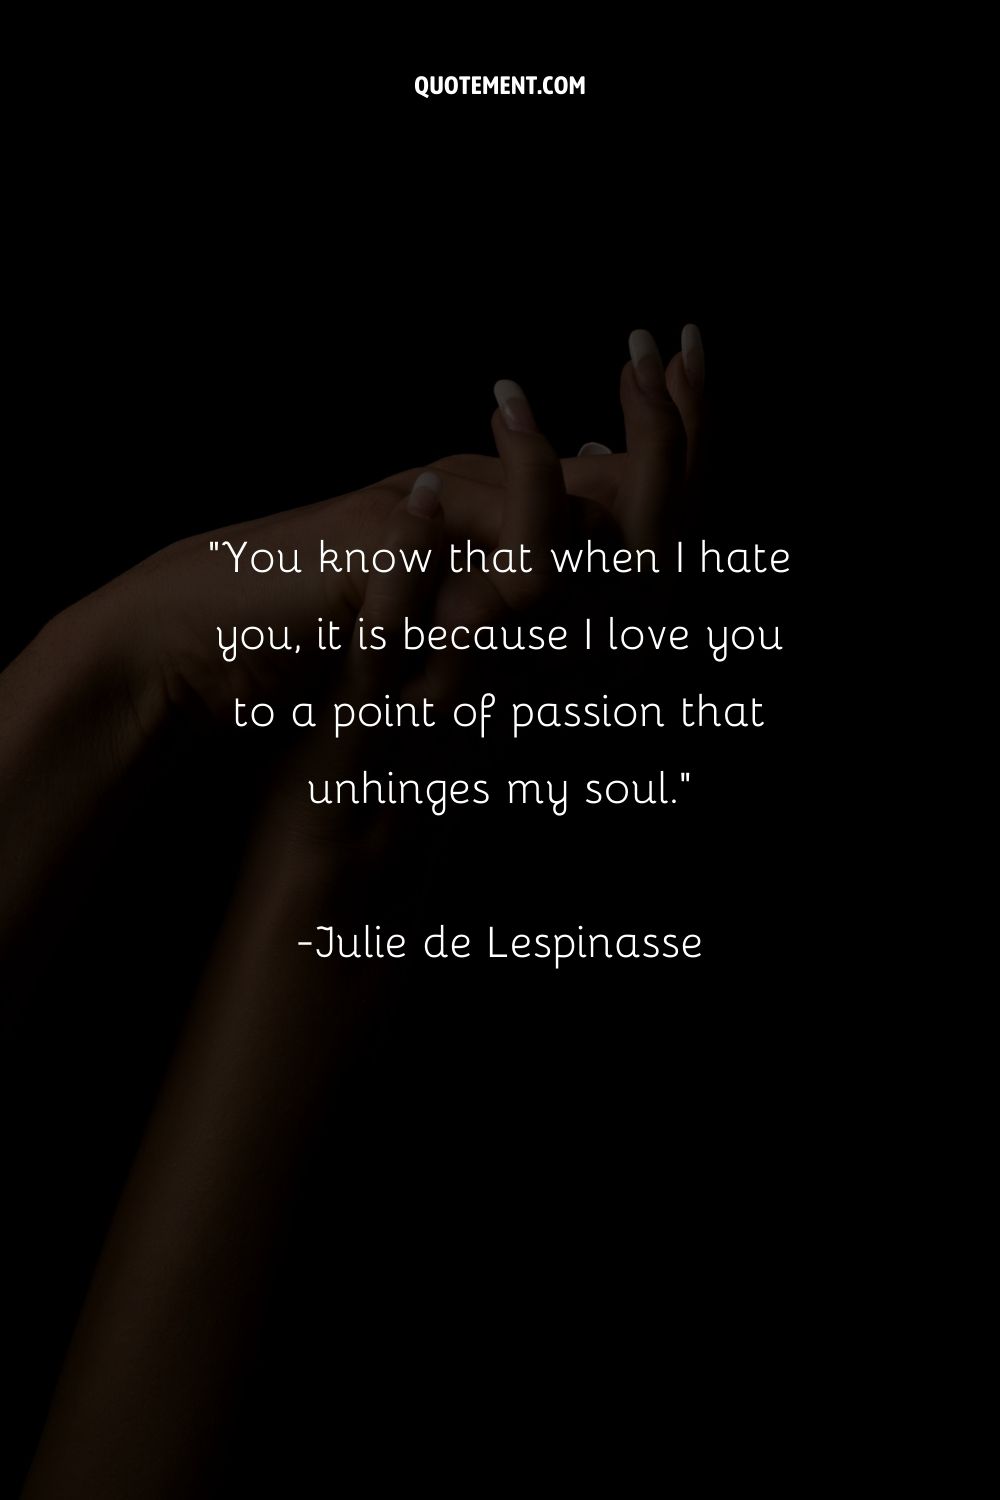 hands in the dark representing love and passion quotes